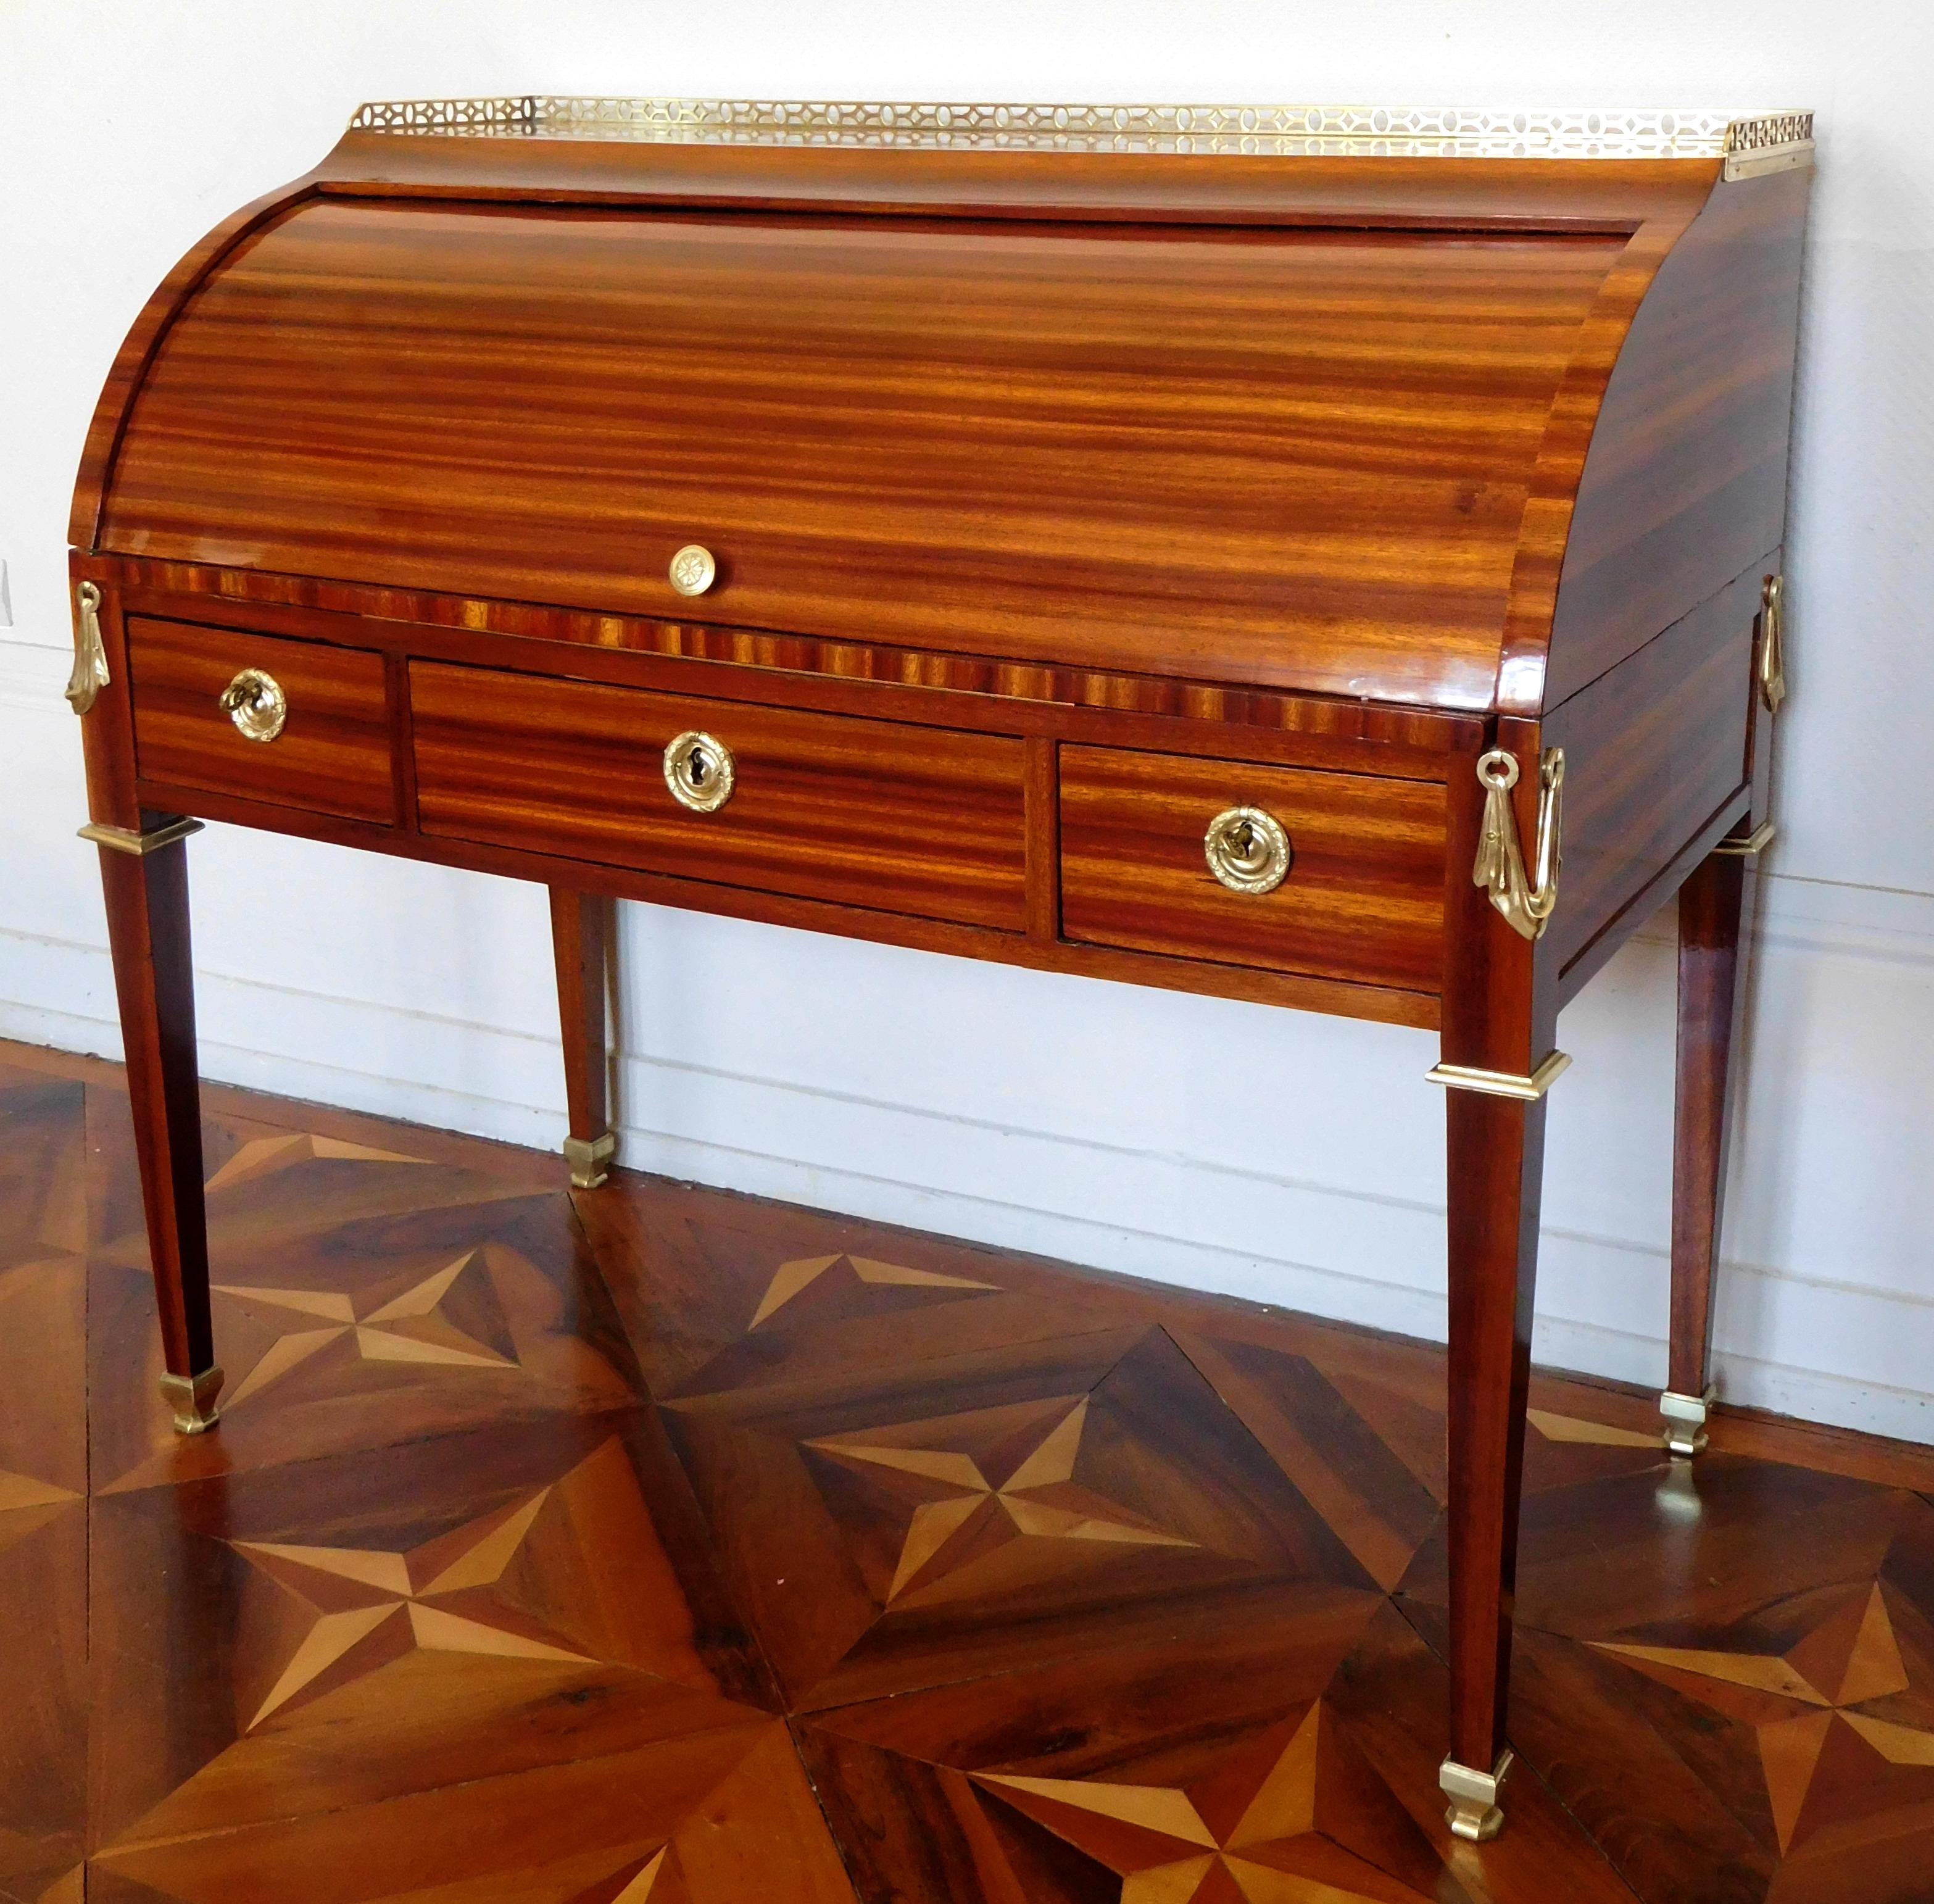 Louis XVI mahogany roll top desk, ormolu ornamentation, France, late 18th century, circa 1780.

Roll top desks were created at the end of Louis XV reign ; they are mechanical pieces of furniture, which allows - once closed - to keep the work